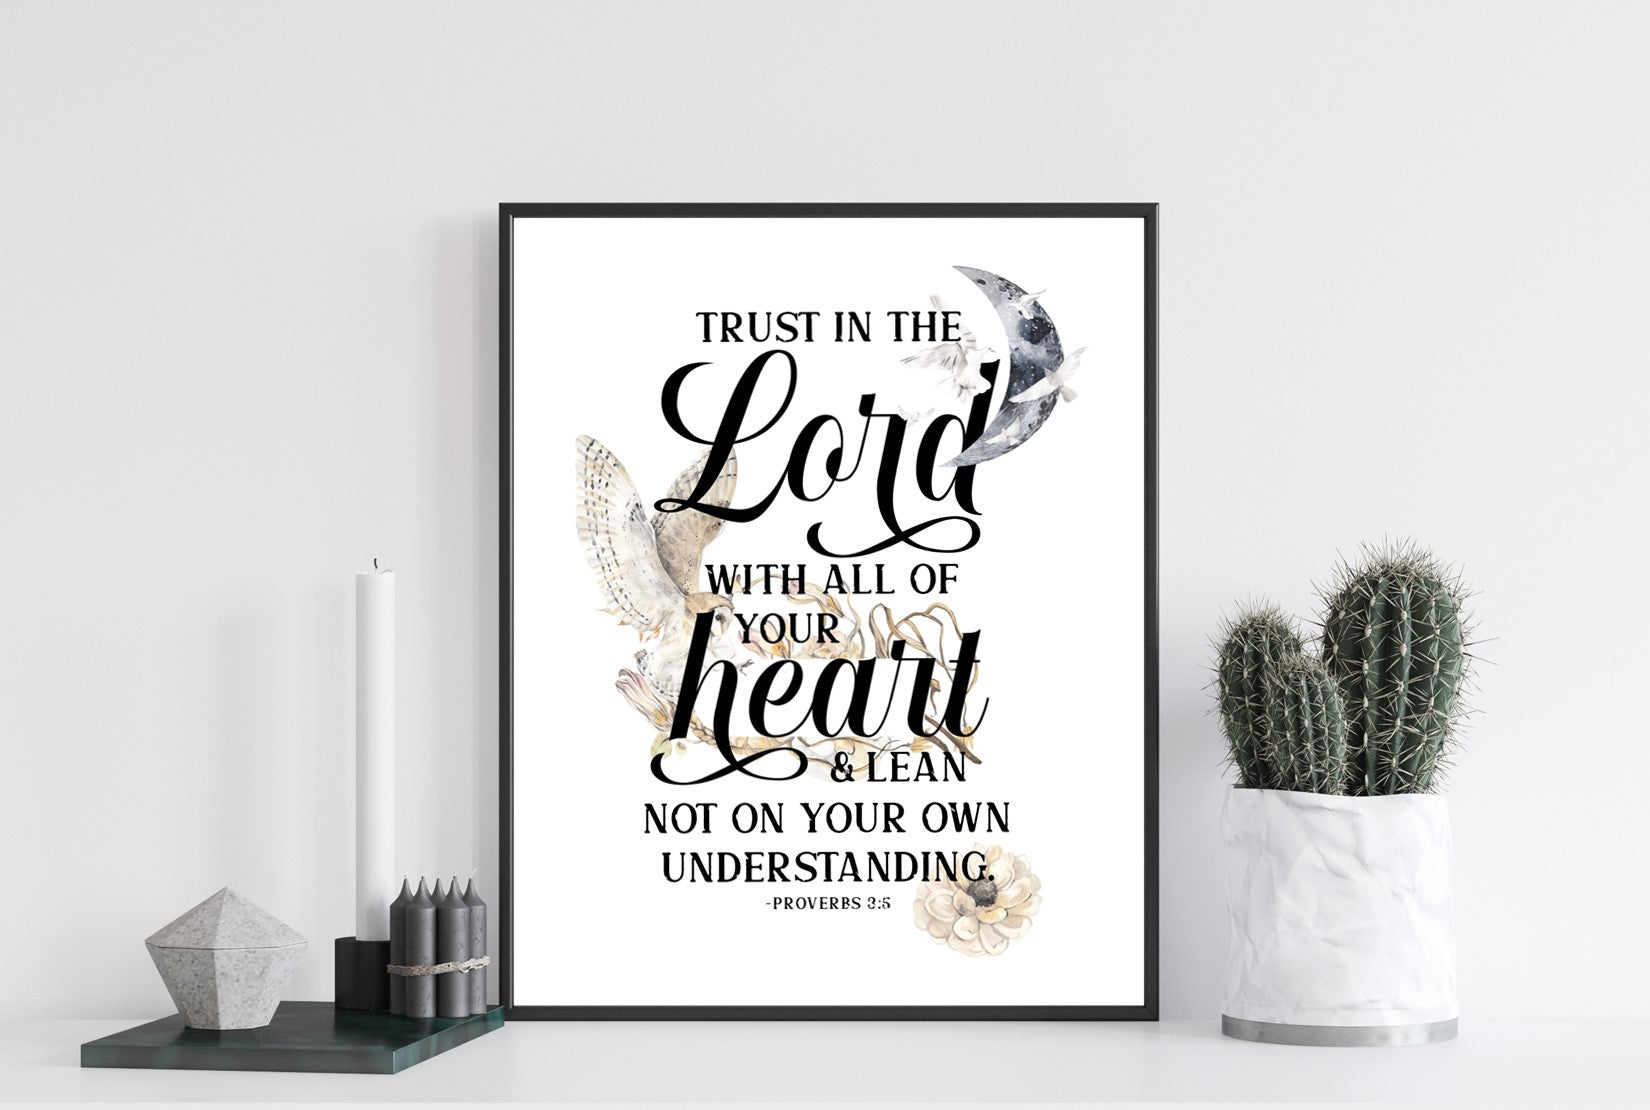 Proverbs 3:5 Trust in the Lord with all of your Heart - DIGITAL Download Printable FILE